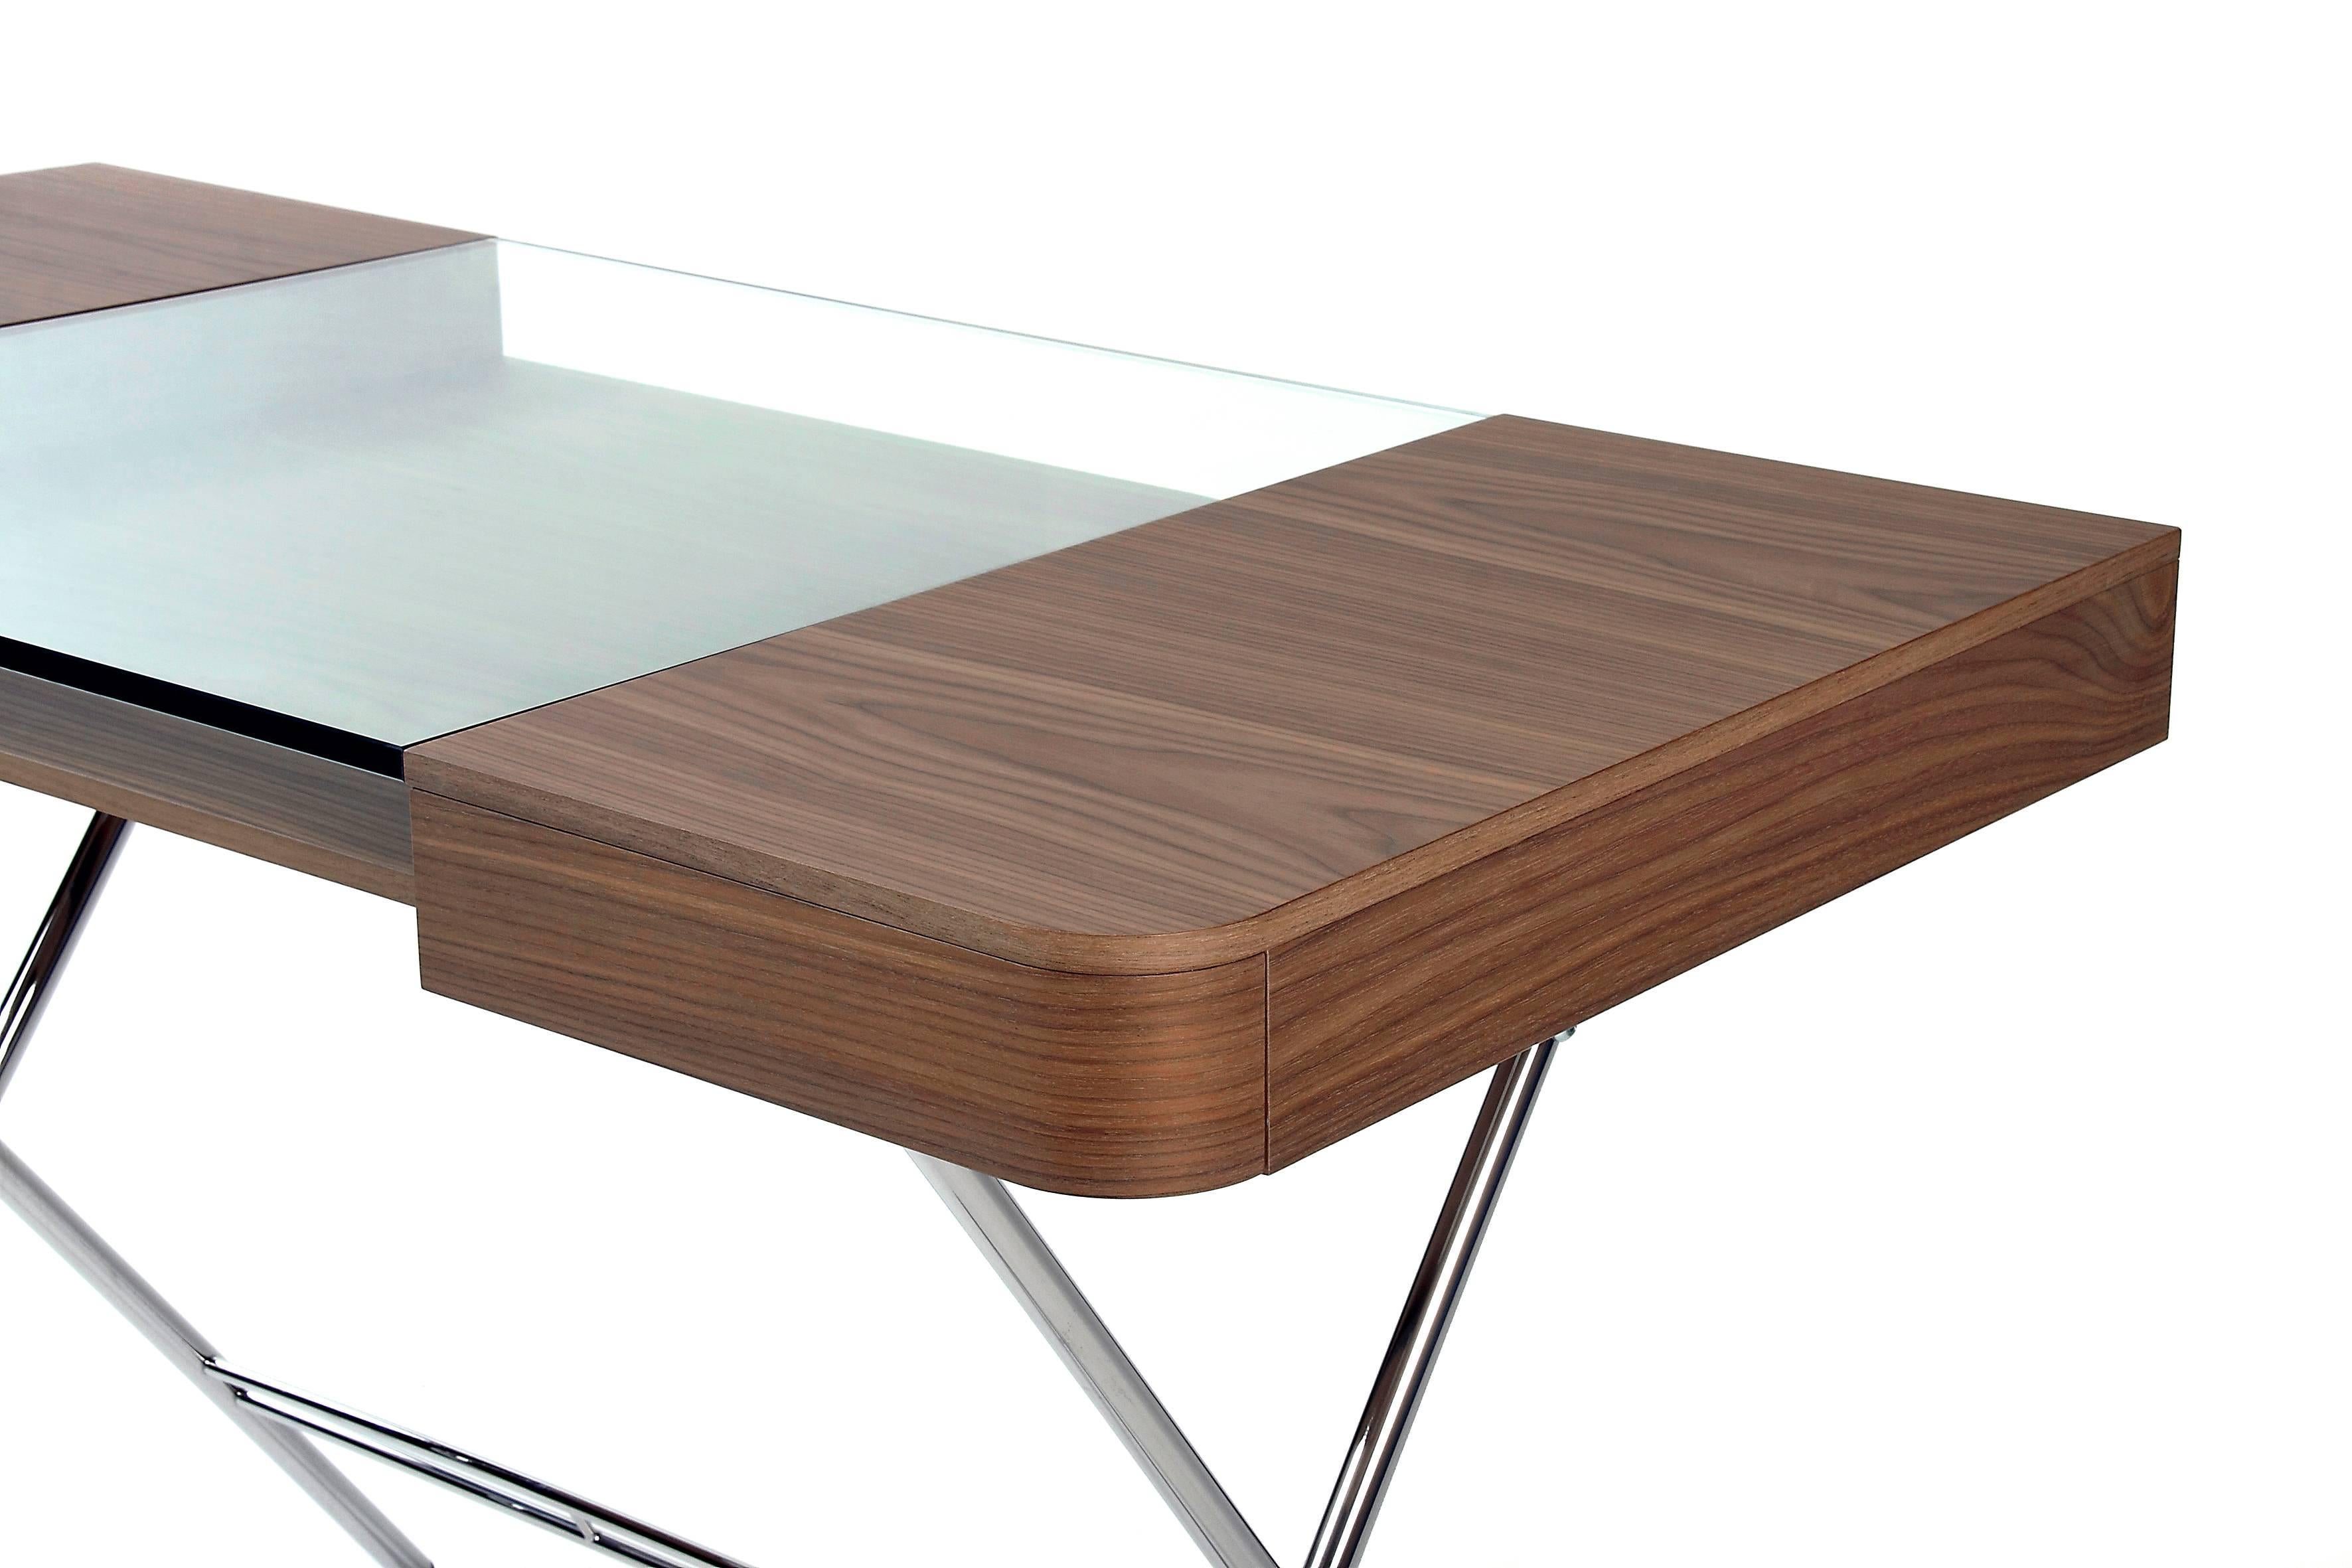 Lacquered Contemporary Cosimo Desk by Marco Zanuso Jr. with Walnut Veneer and Glass Top For Sale